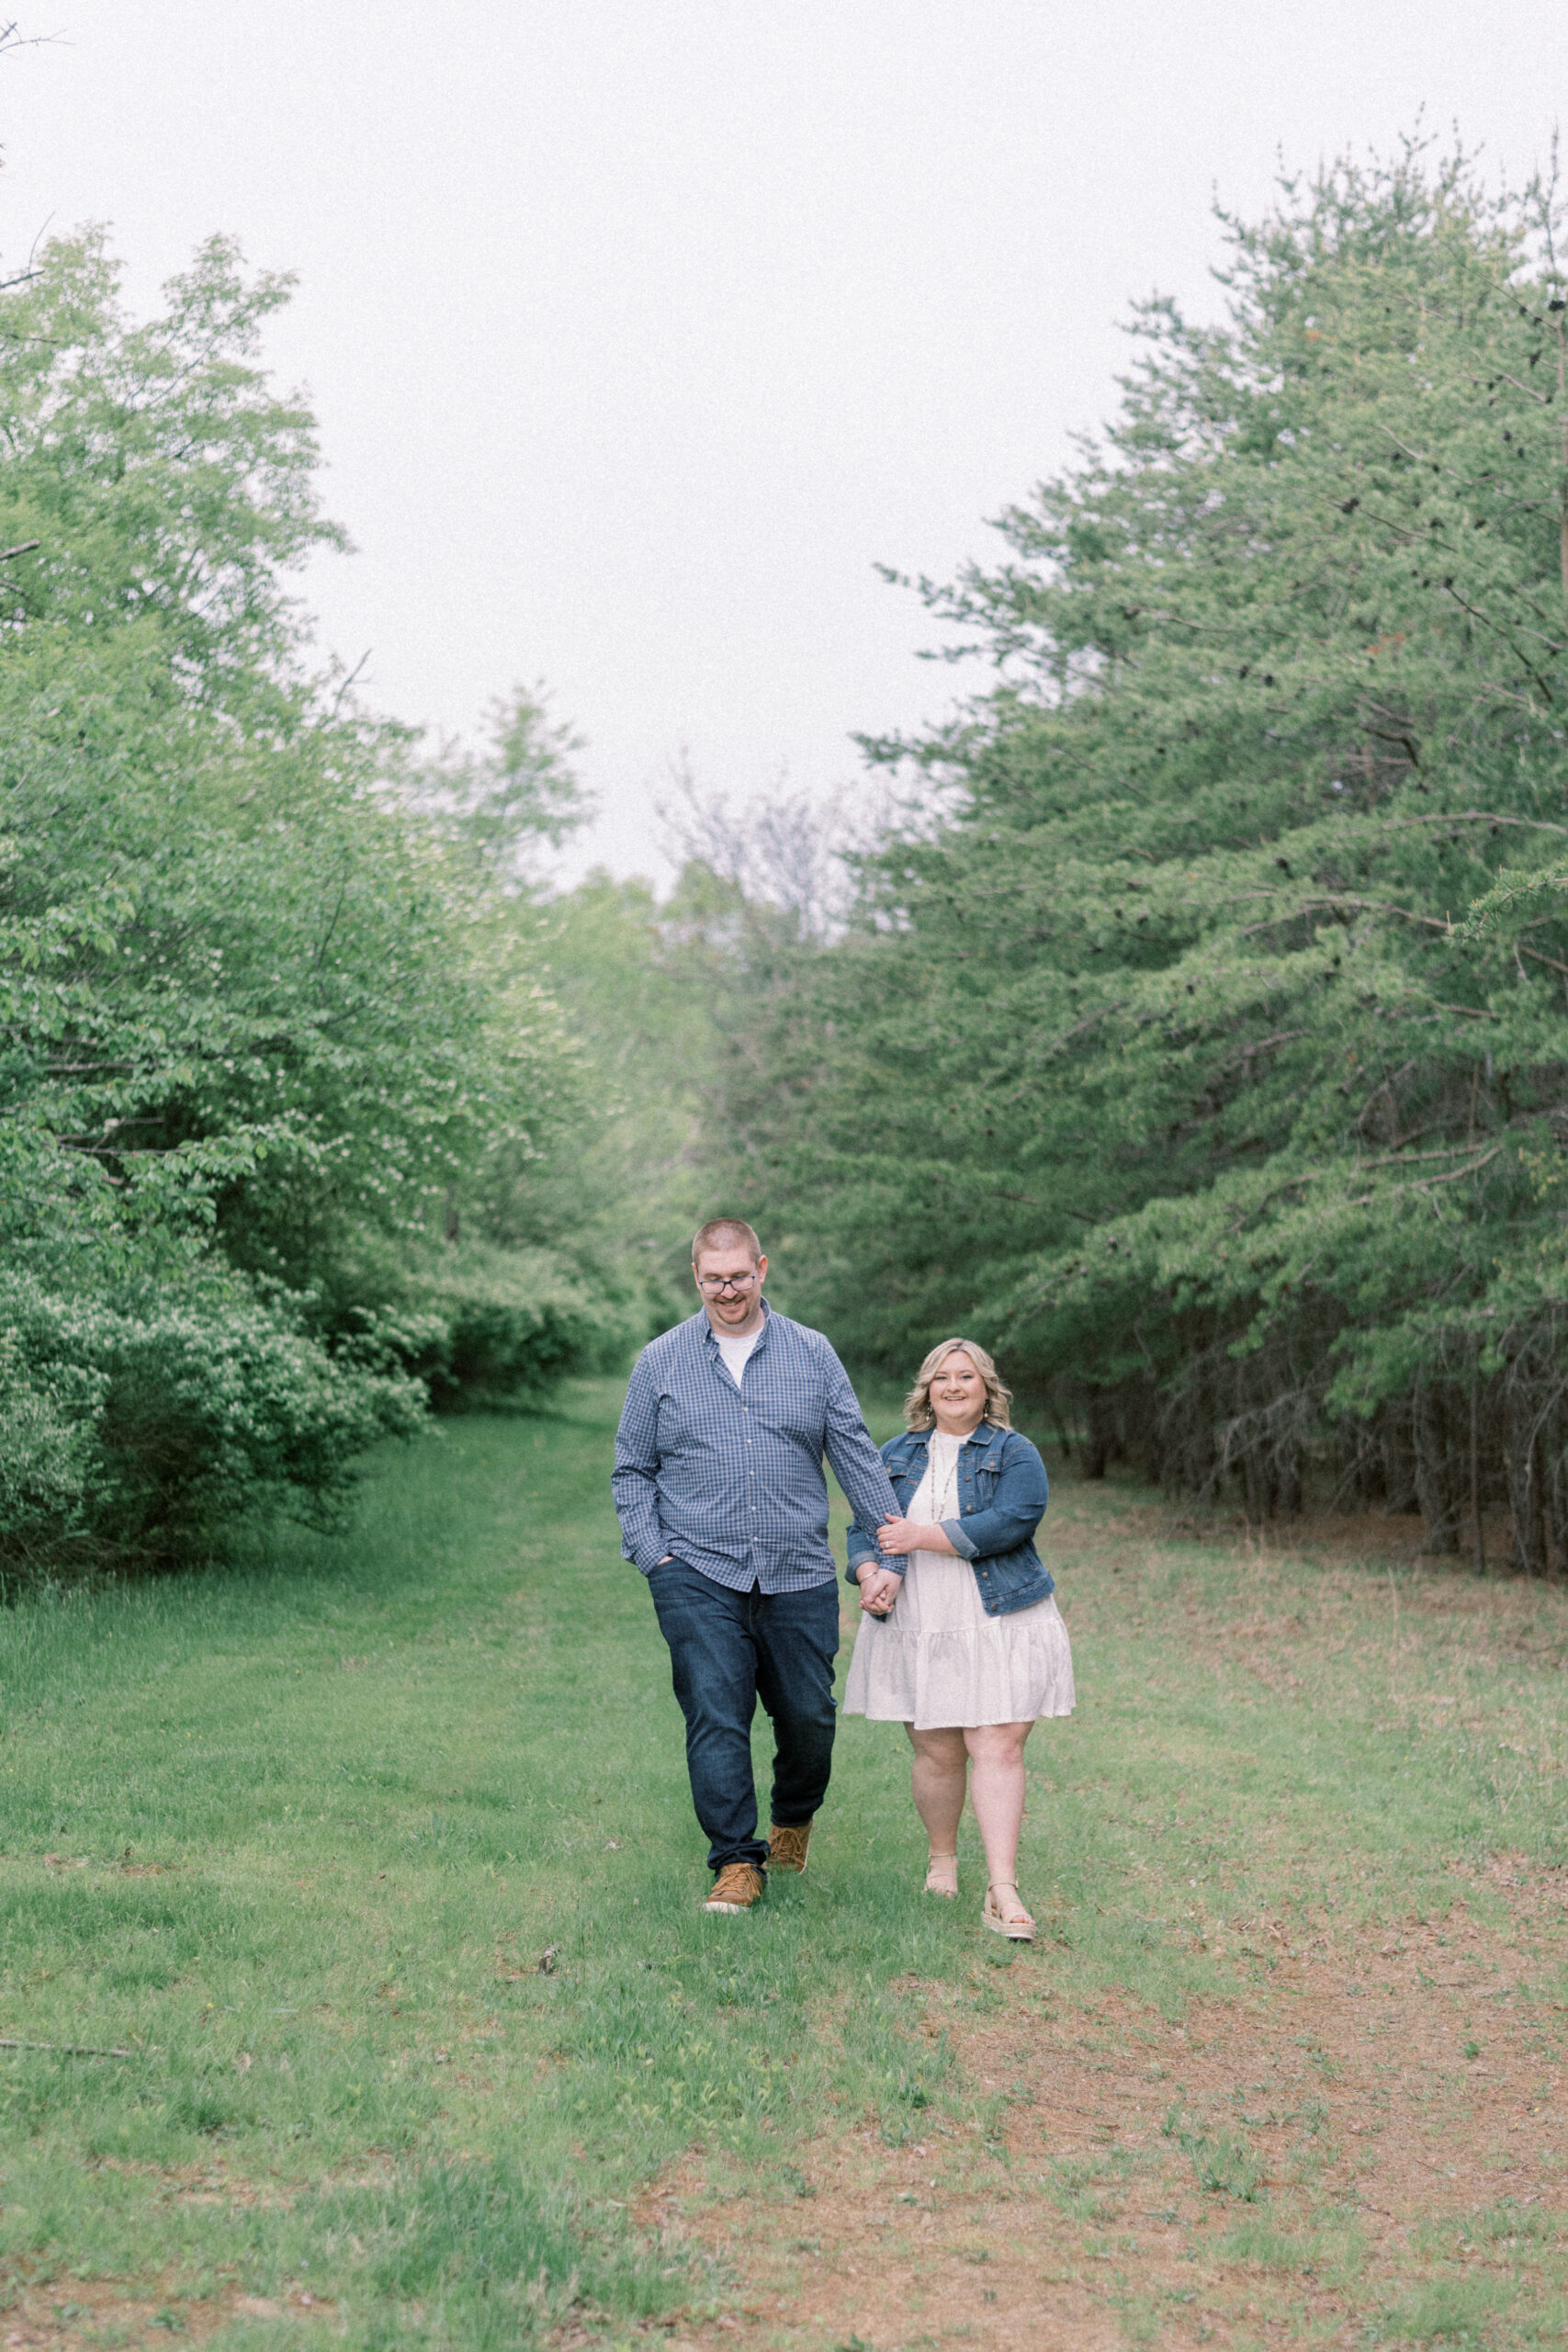 Pennsylvania wedding photographer captures couple walking hand in hand during spring engagement portraits